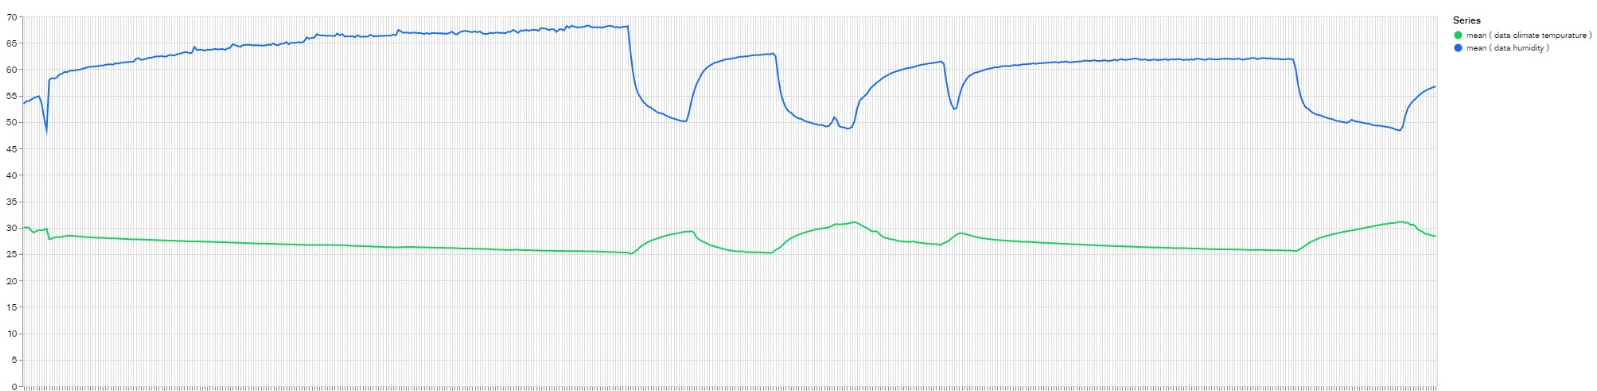 Graph of temperature and humidity data logged using this project over a two week period